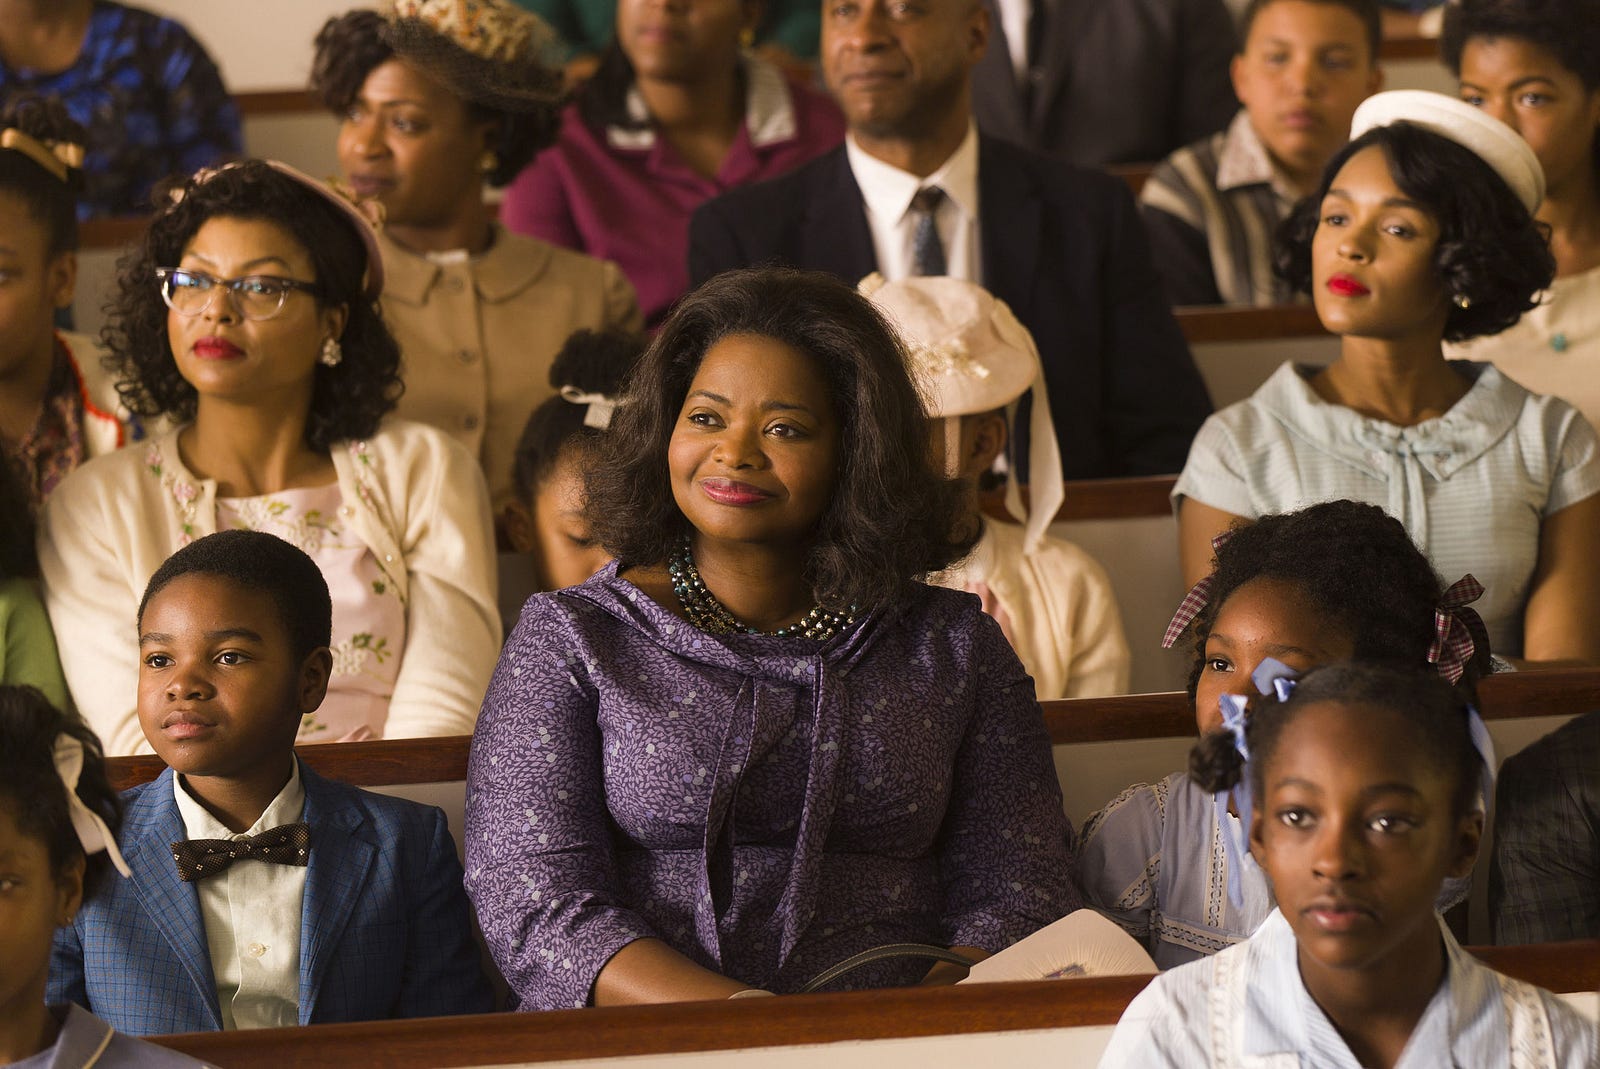 Octavia Spencer to Star in Miniseries Based on the Life of Madam C.J. Walker1600 x 1068